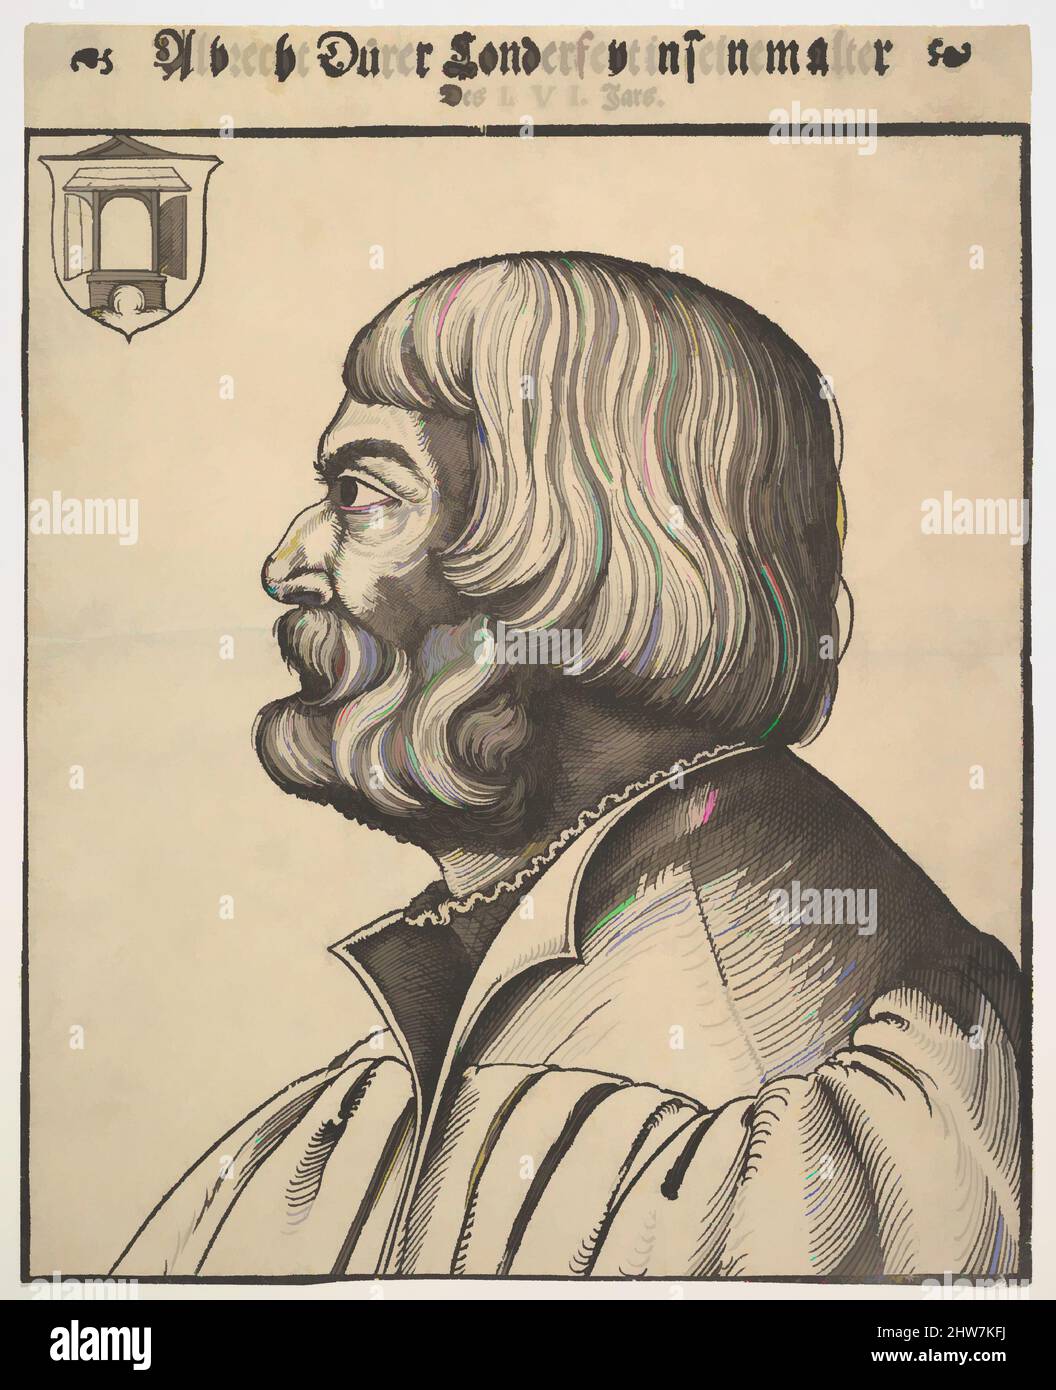 Art inspired by Portrait of Albrecht Dürer, ca. 1538, Woodcut, sheet: 12 5/8 x 10 1/8 in. (32 x 25.7 cm), Prints, Attributed to Erhard Schön (German, Nuremberg 1491–1542 Nuremberg, Classic works modernized by Artotop with a splash of modernity. Shapes, color and value, eye-catching visual impact on art. Emotions through freedom of artworks in a contemporary way. A timeless message pursuing a wildly creative new direction. Artists turning to the digital medium and creating the Artotop NFT Stock Photo